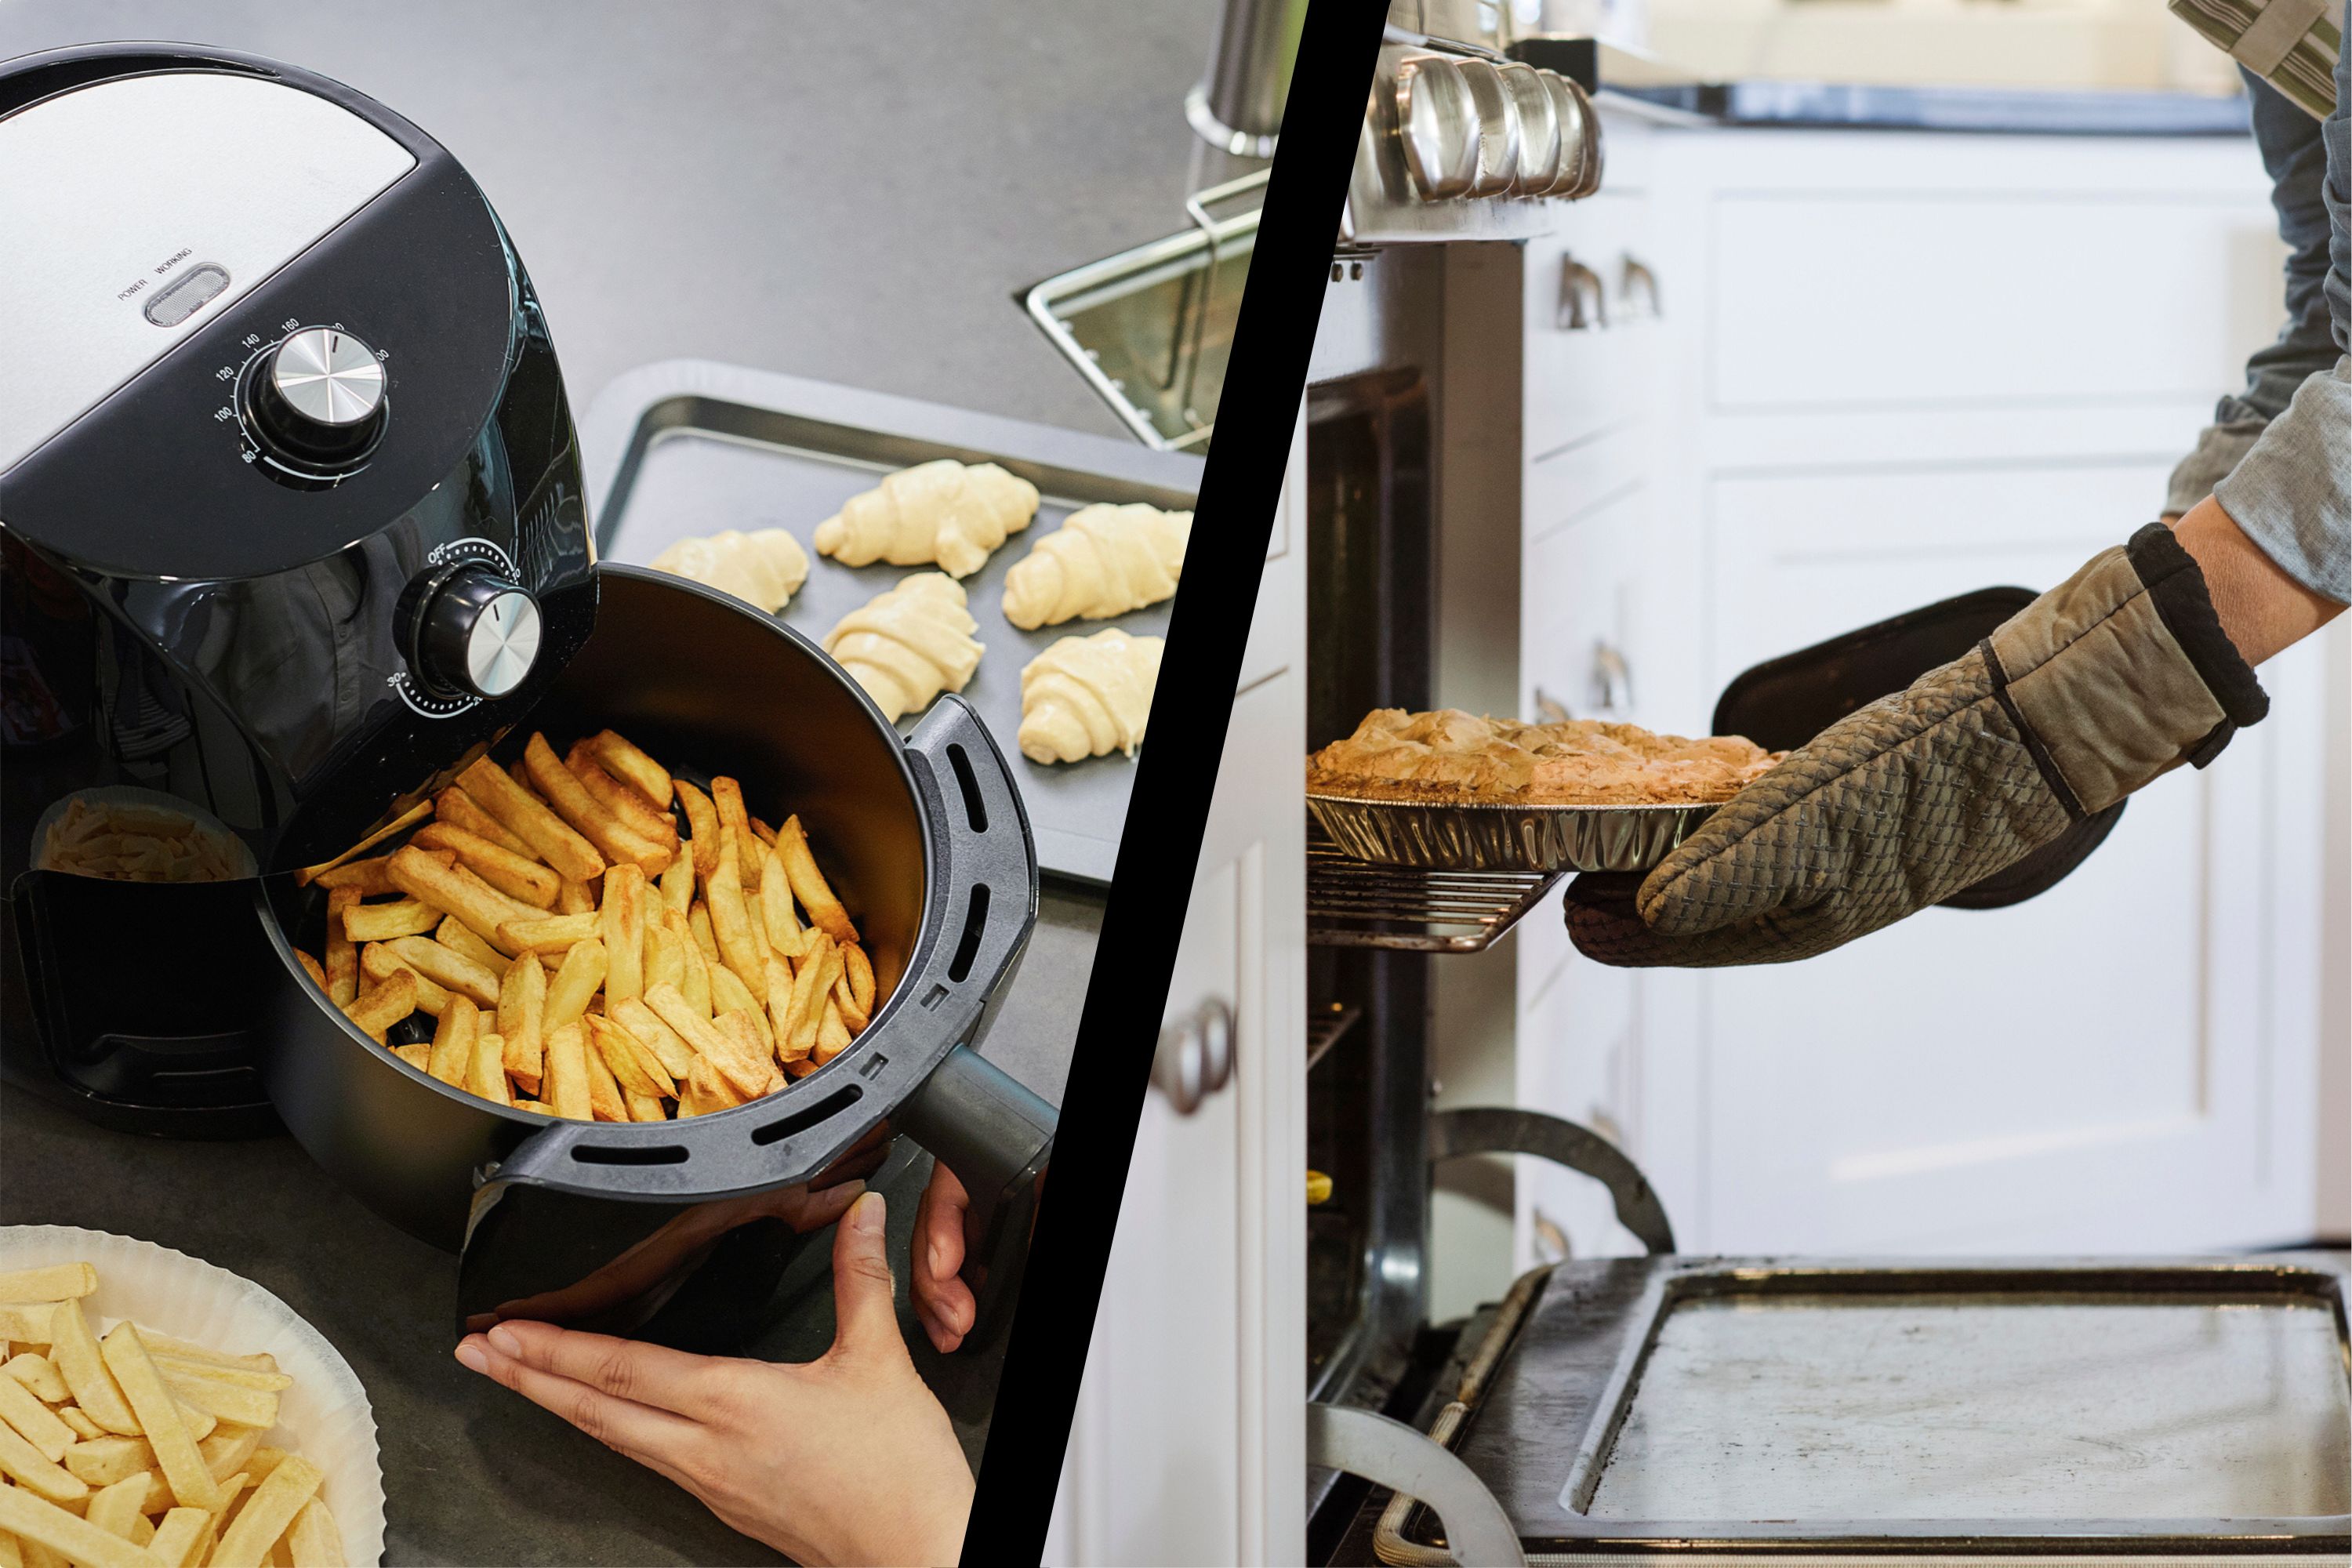 Air fryer vs oven – which is really cheaper to run?